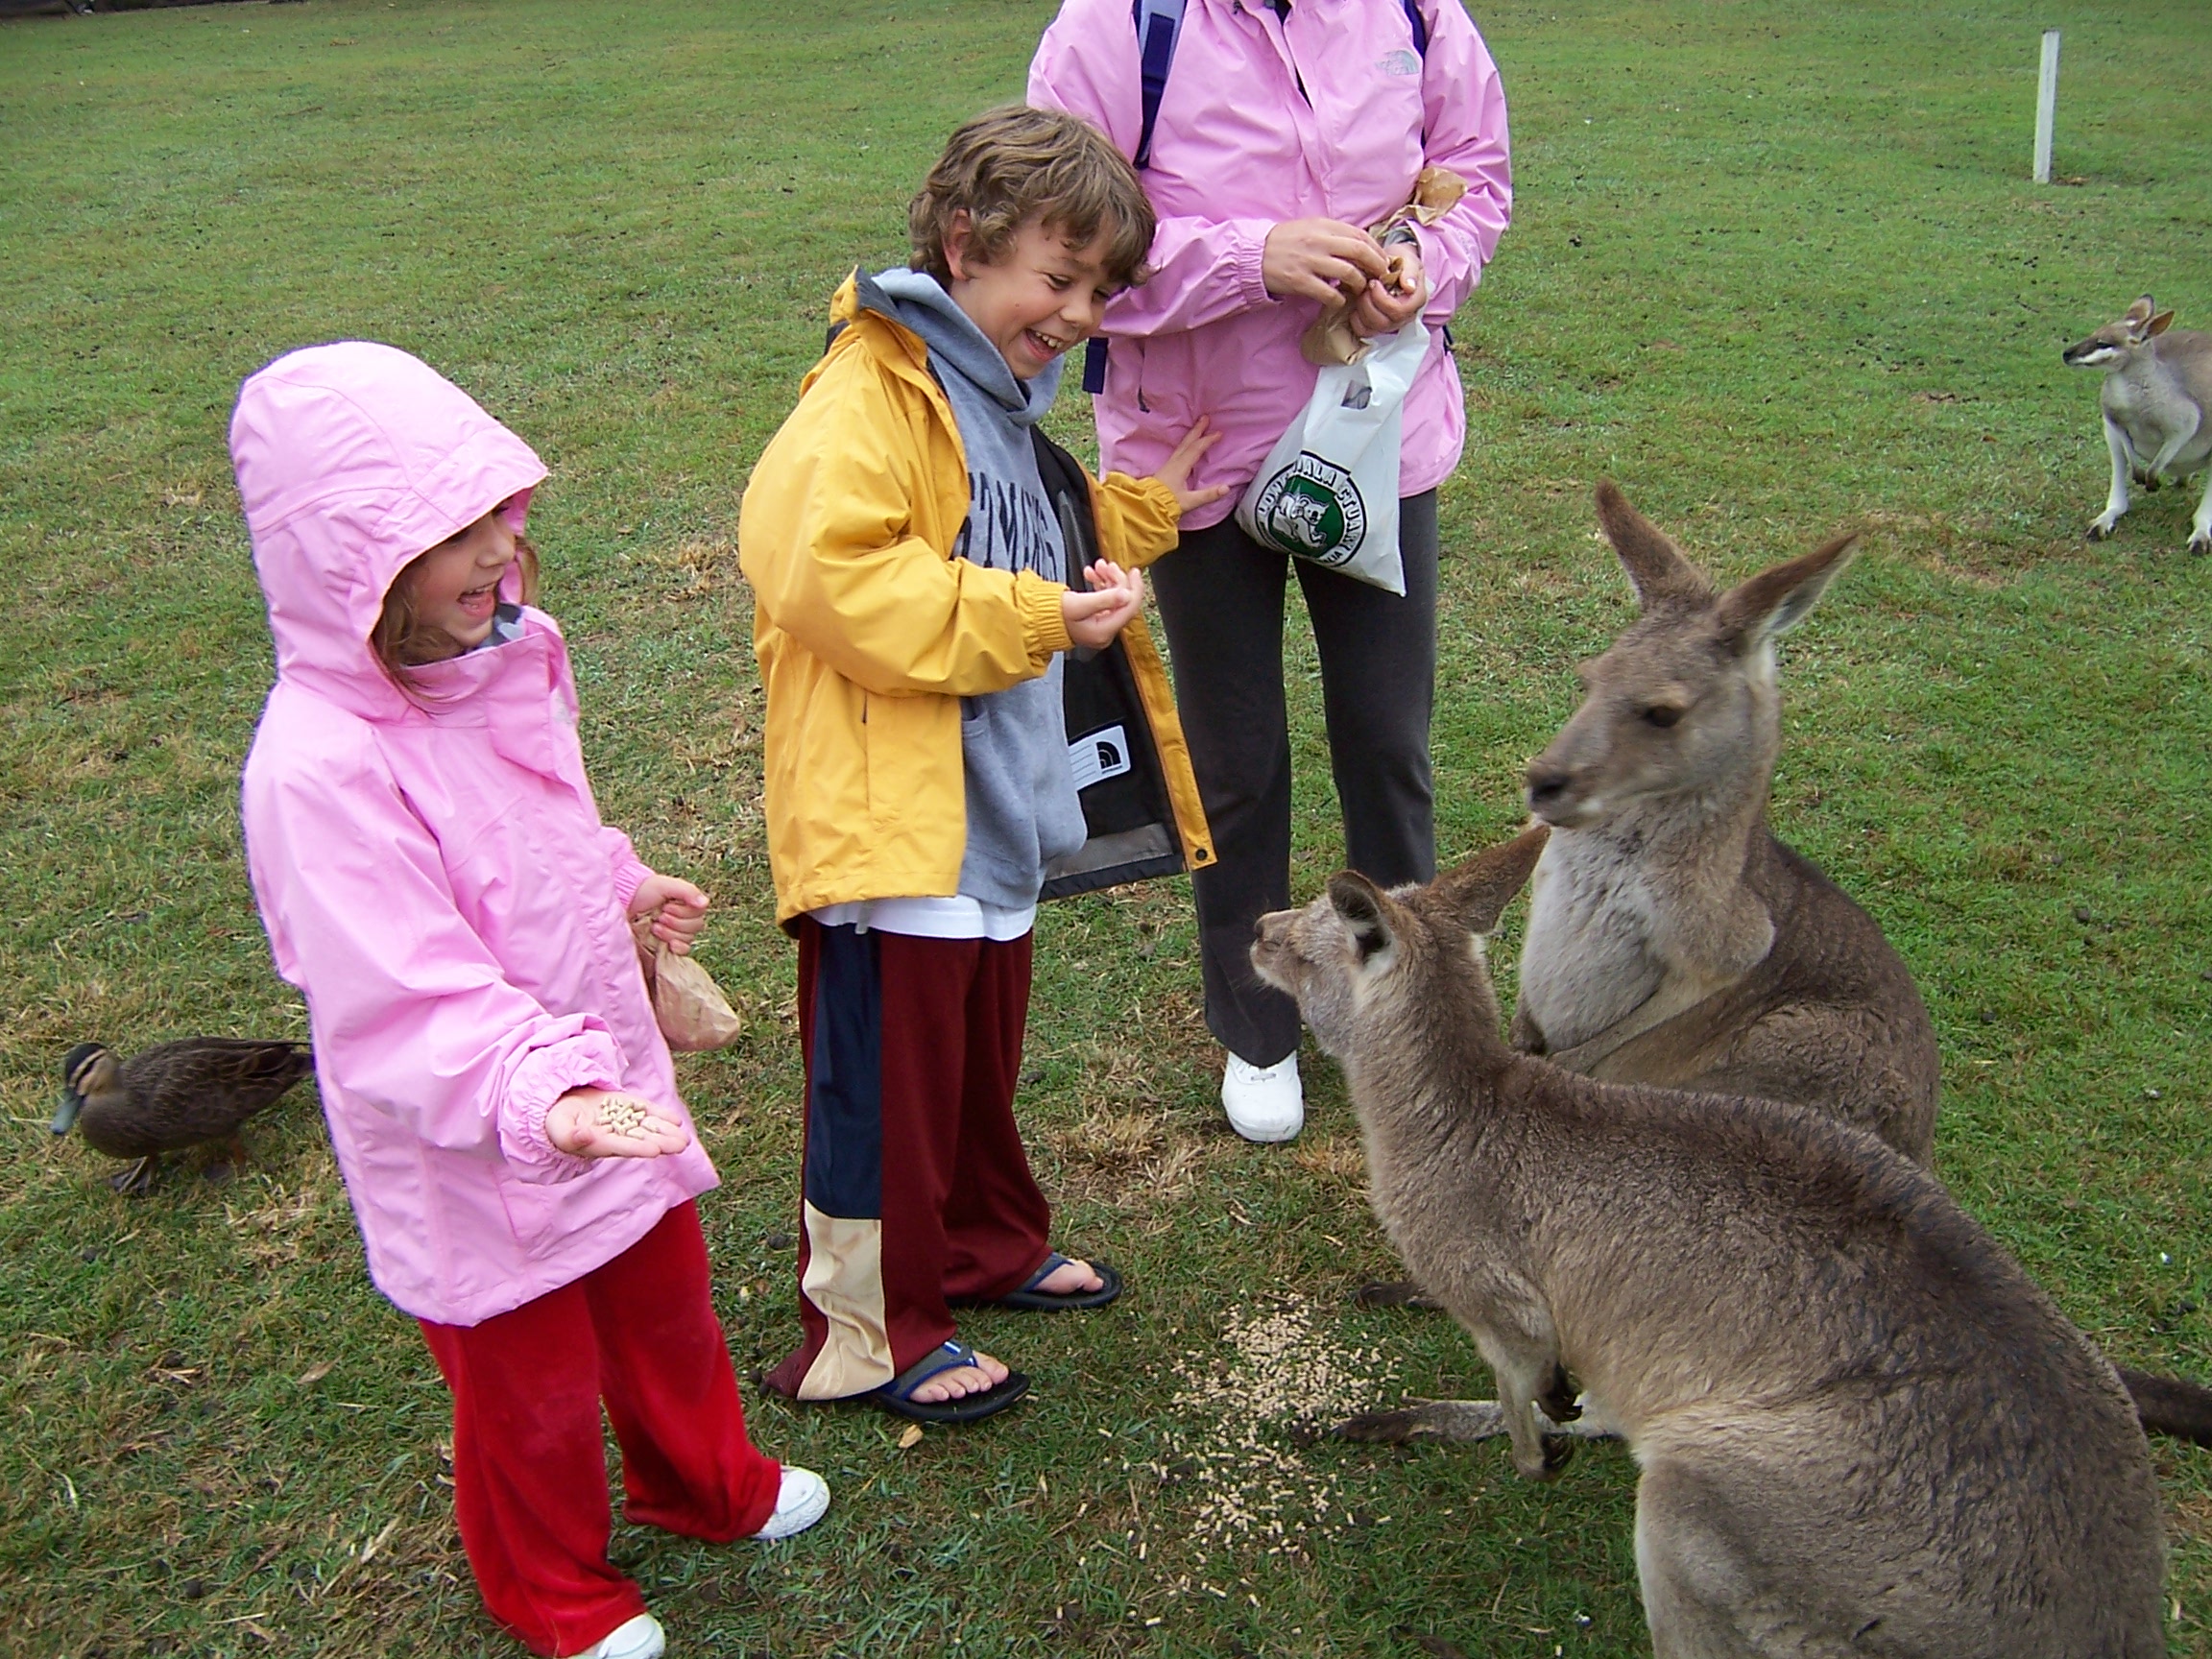 The greedy Kangaroo. This Kangaroo did not want to wait for a hand out, he just took the whole bag. But Henry, what manners you have